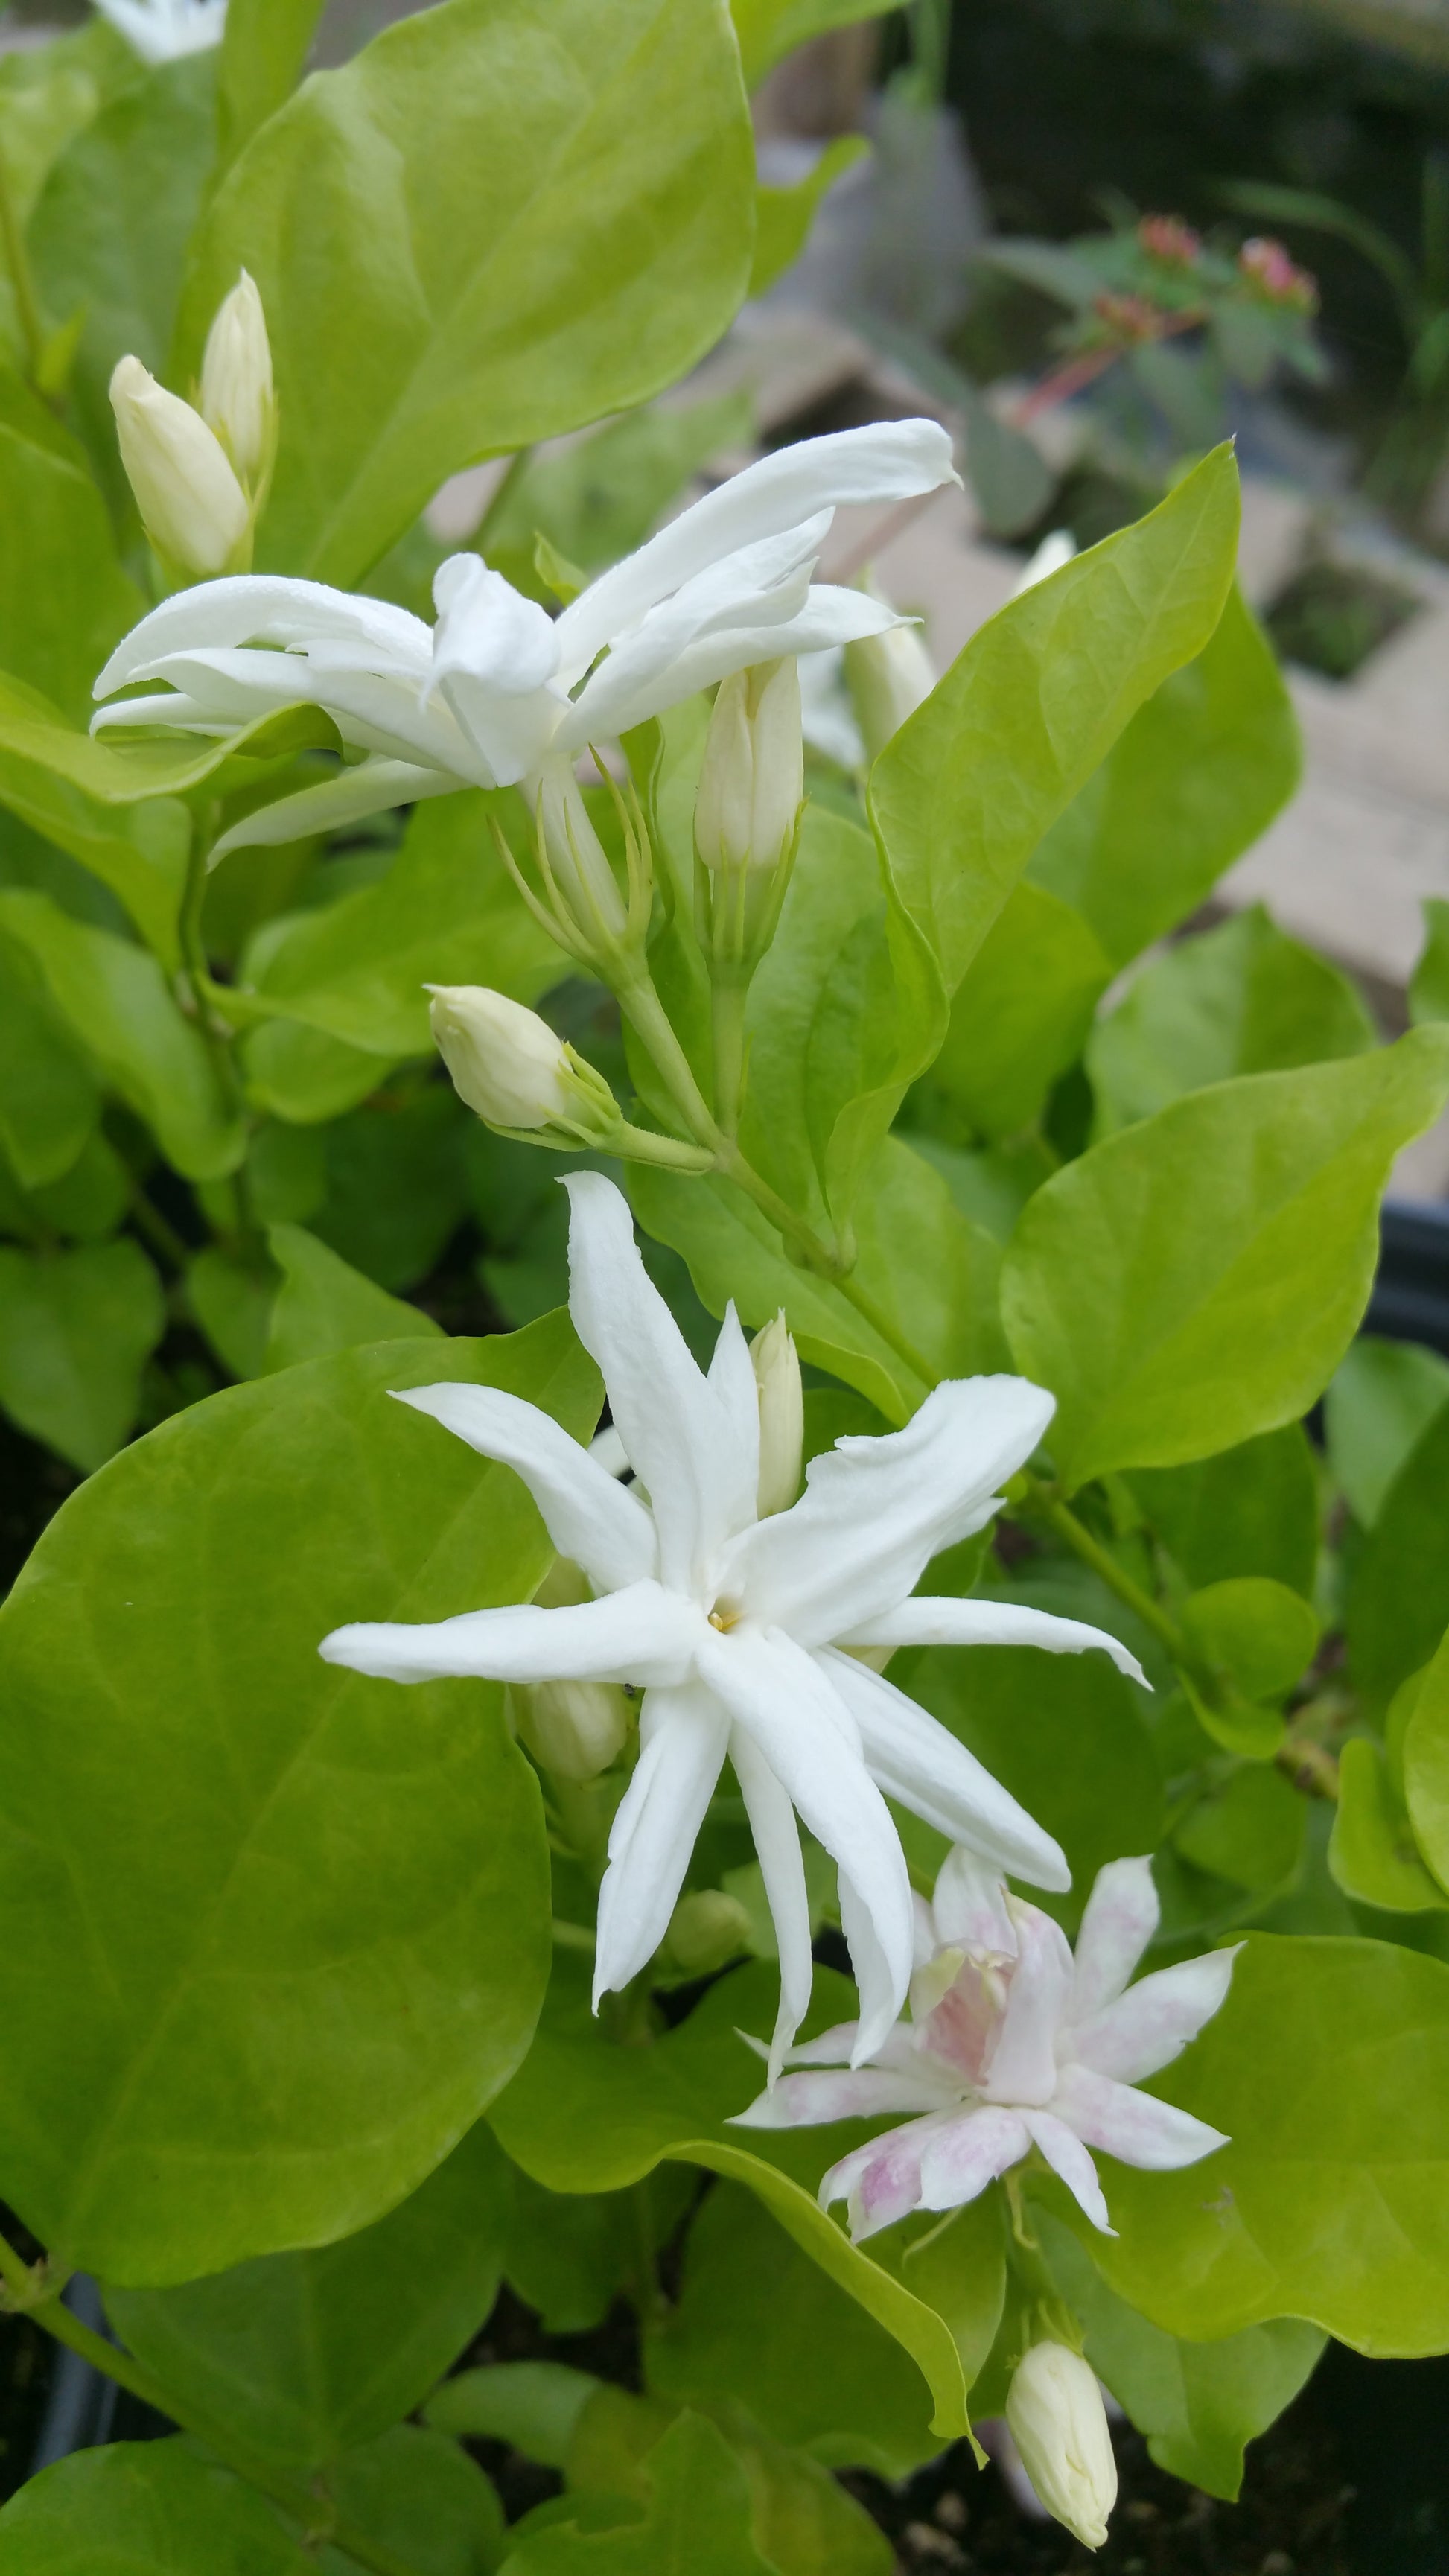 White jasmine blooms and buds against light green leaves